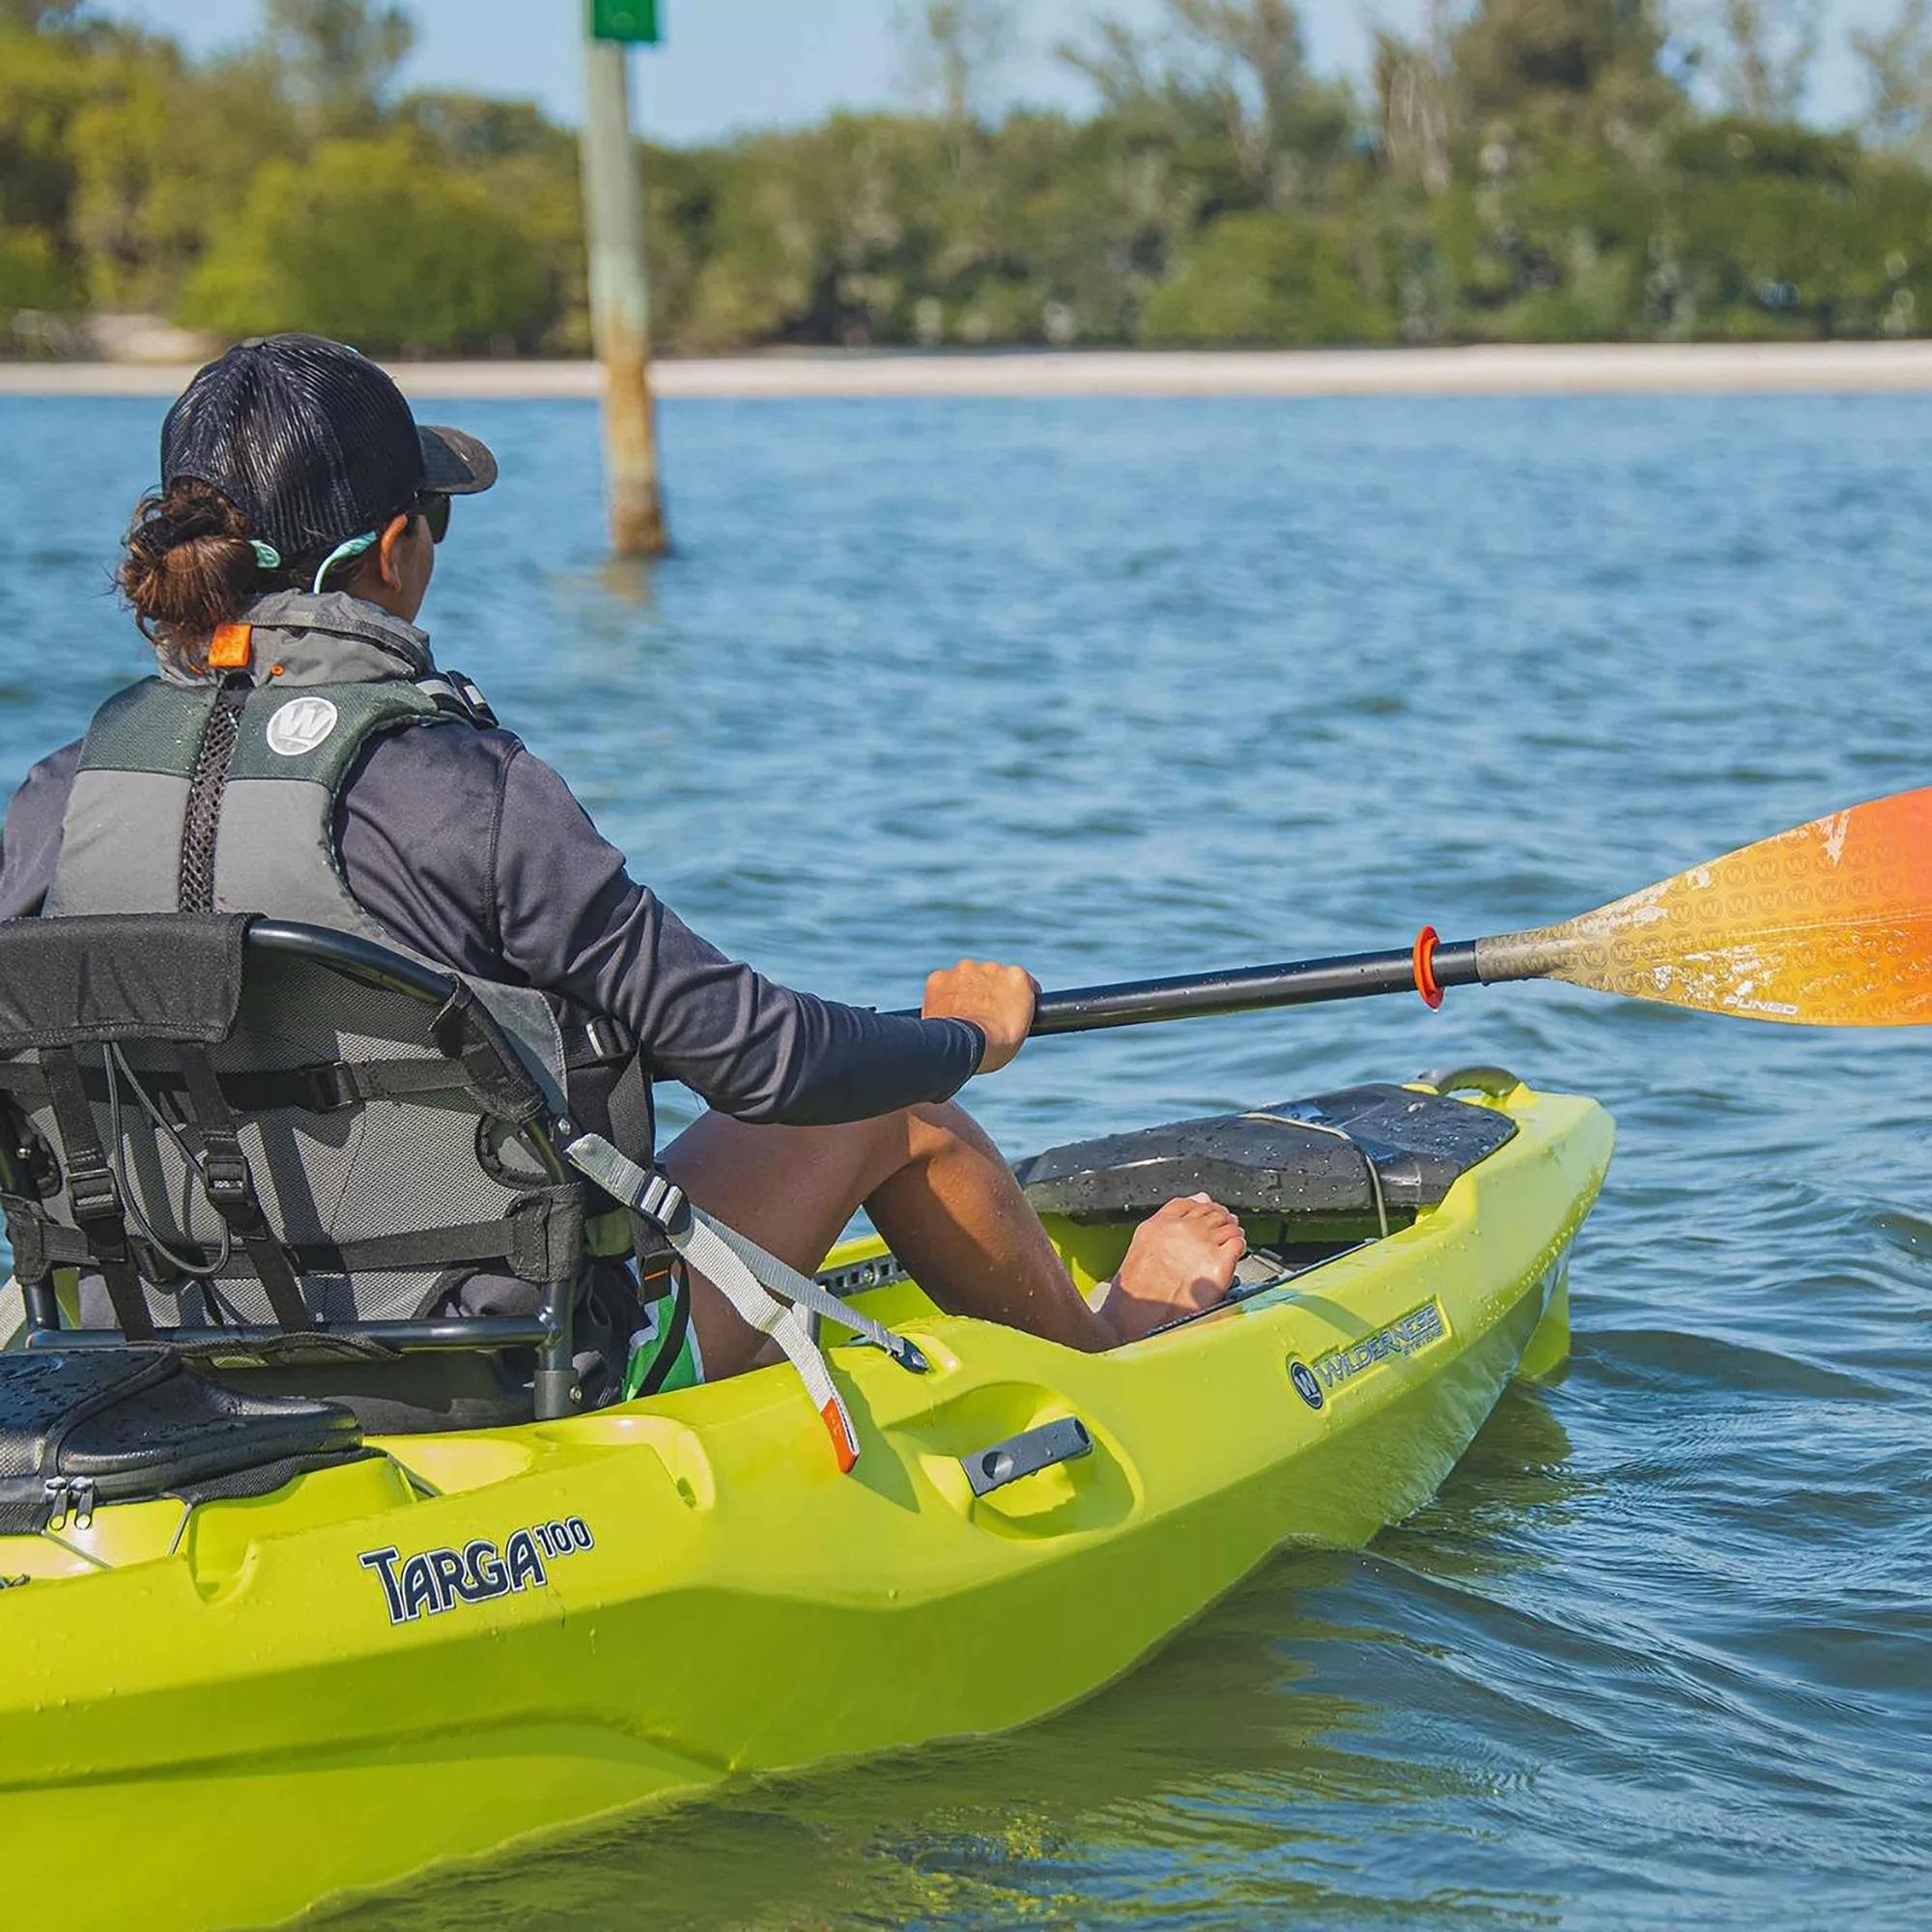 WILDERNESS SYSTEMS - Targa 100 Recreational Kayak - Discontinued color/model - Yellow - 9751121180 - LIFE STYLE 2